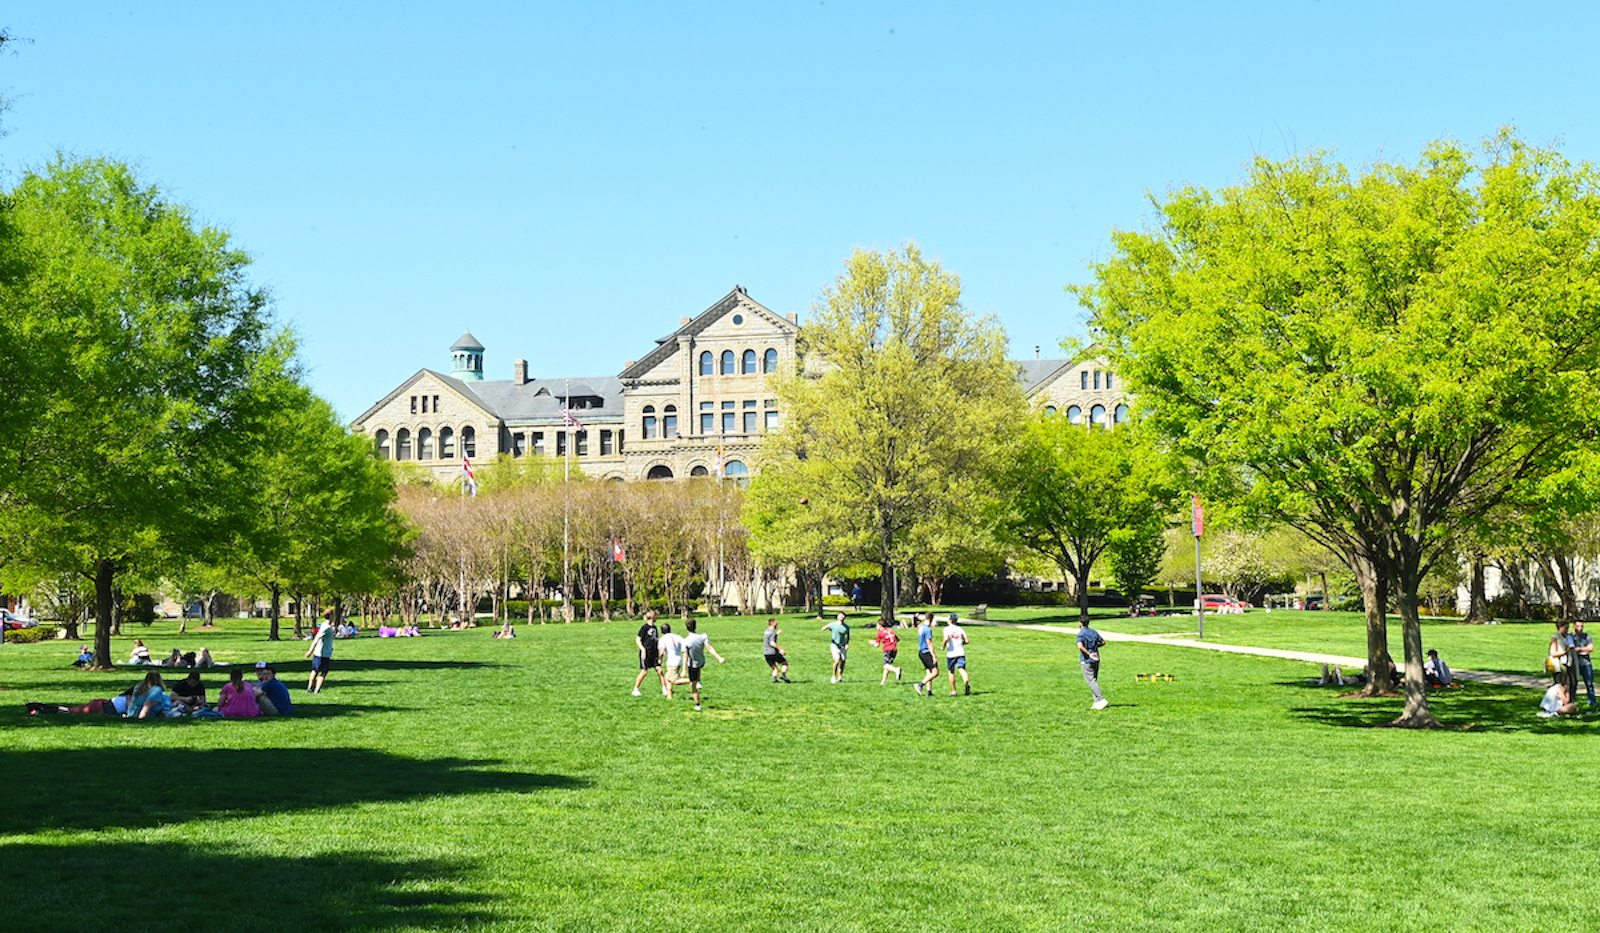 students playing on campus lawn